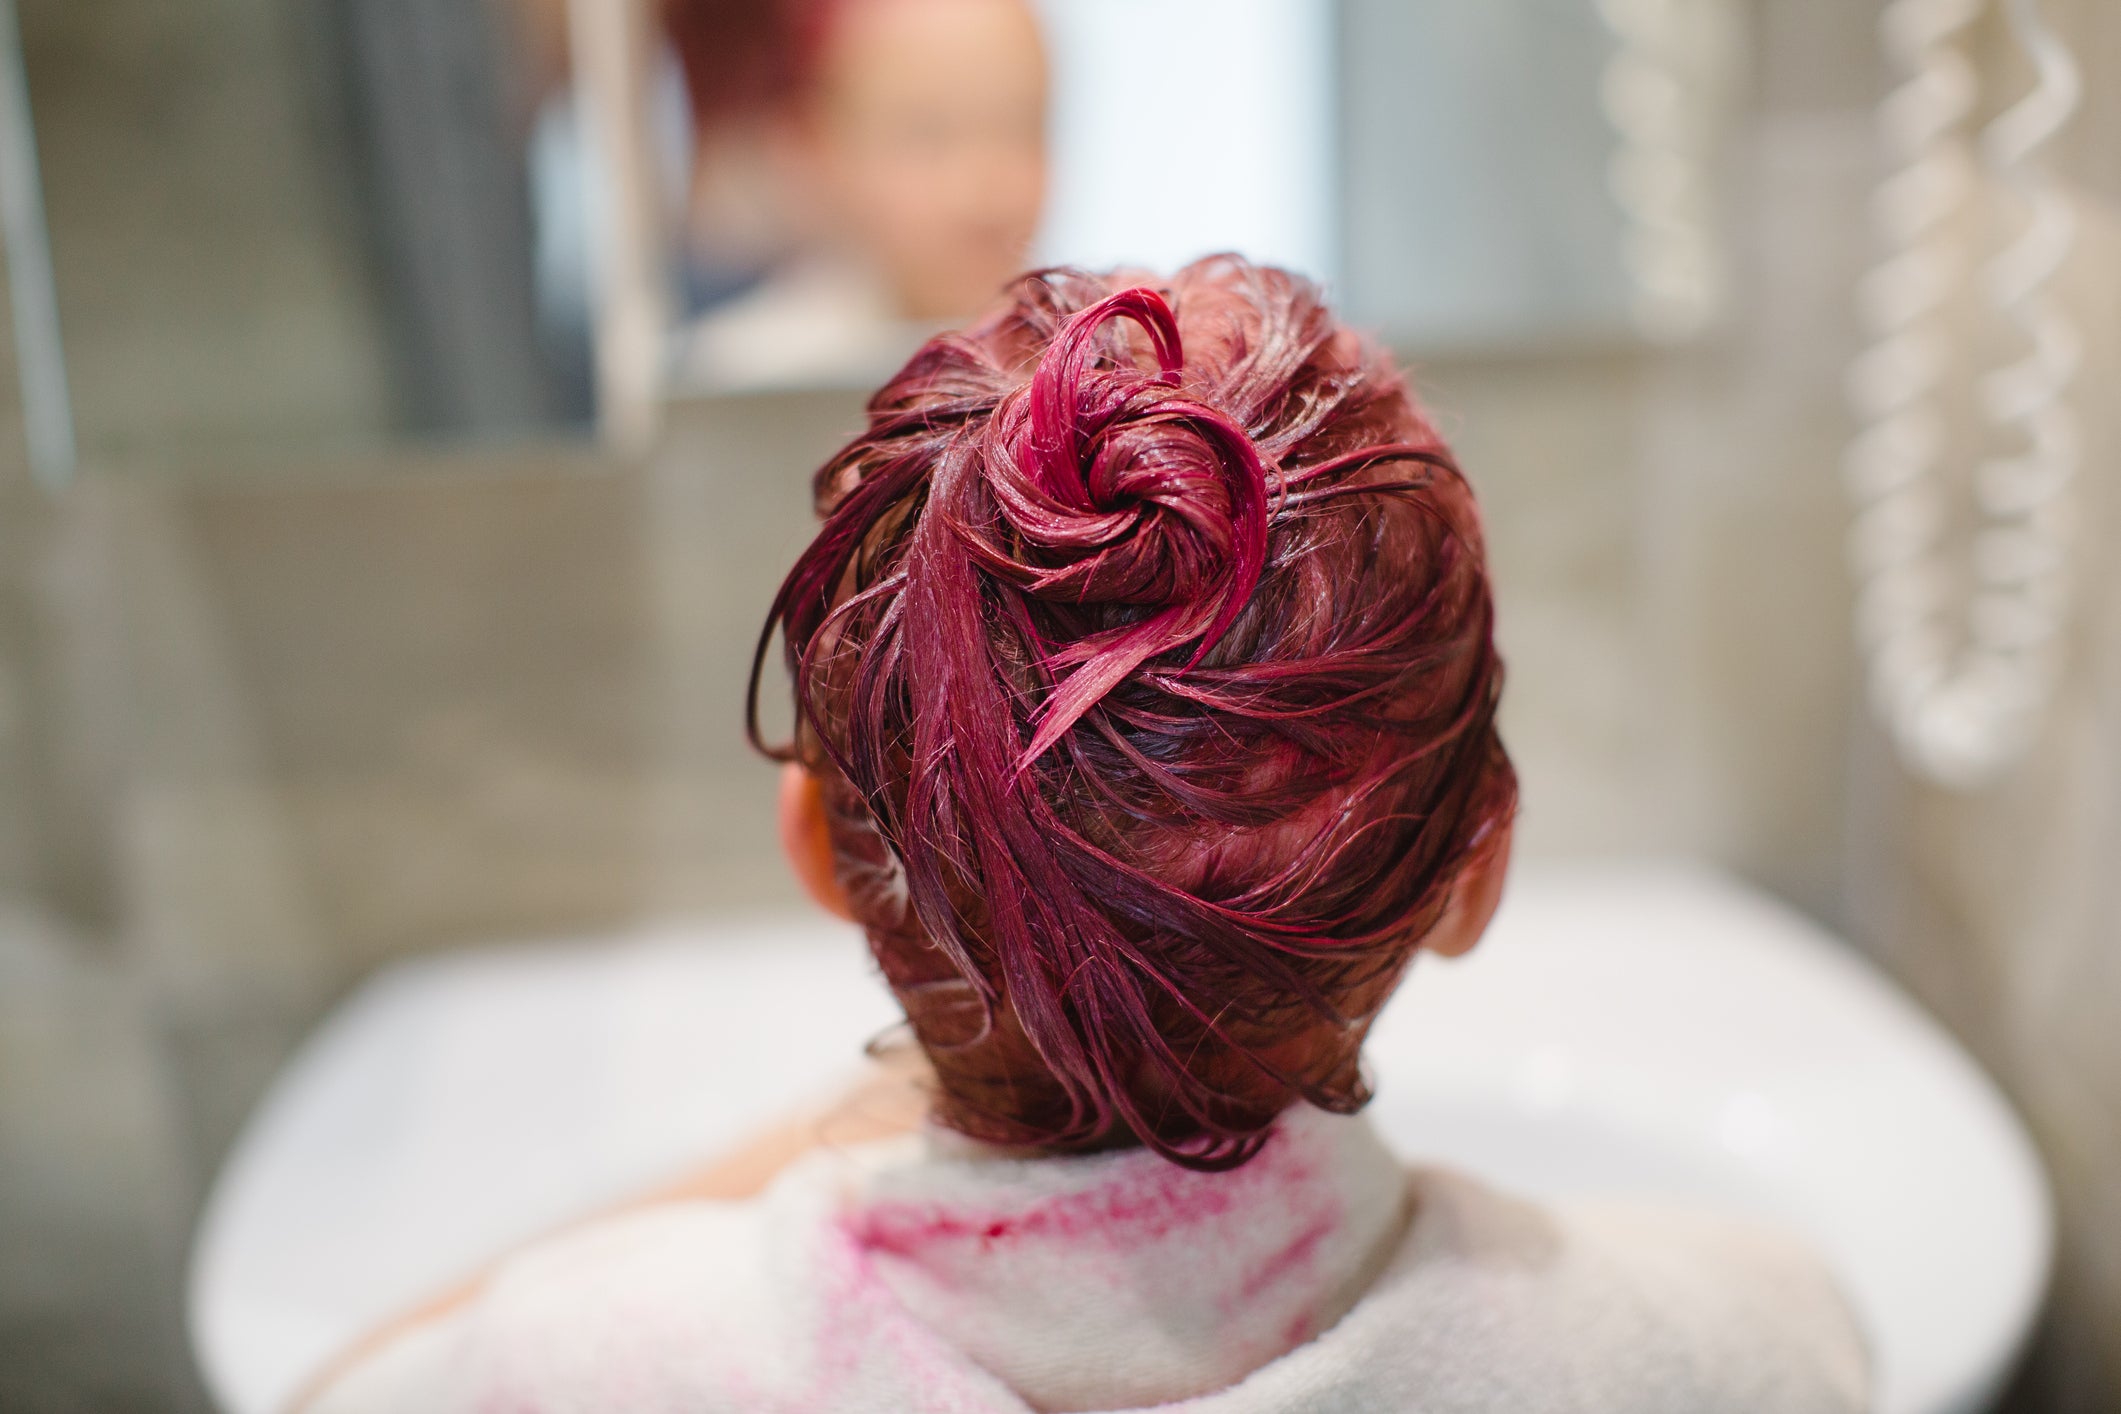 How to Get Hair Dye Out of Towels | Clorox®